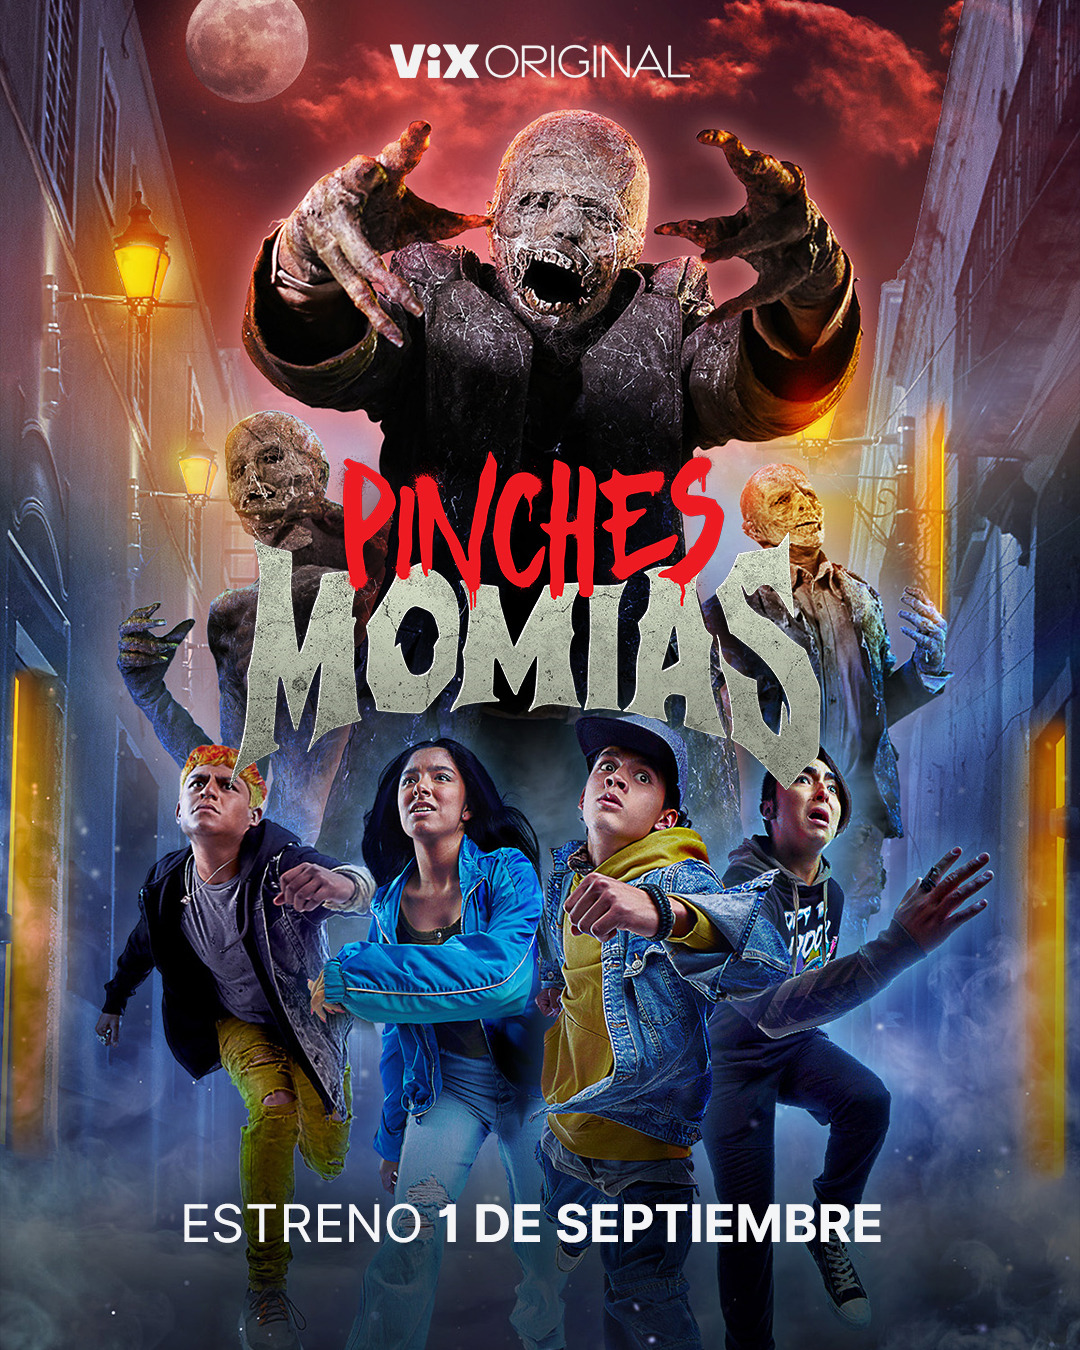 Extra Large TV Poster Image for Pinches Momias 